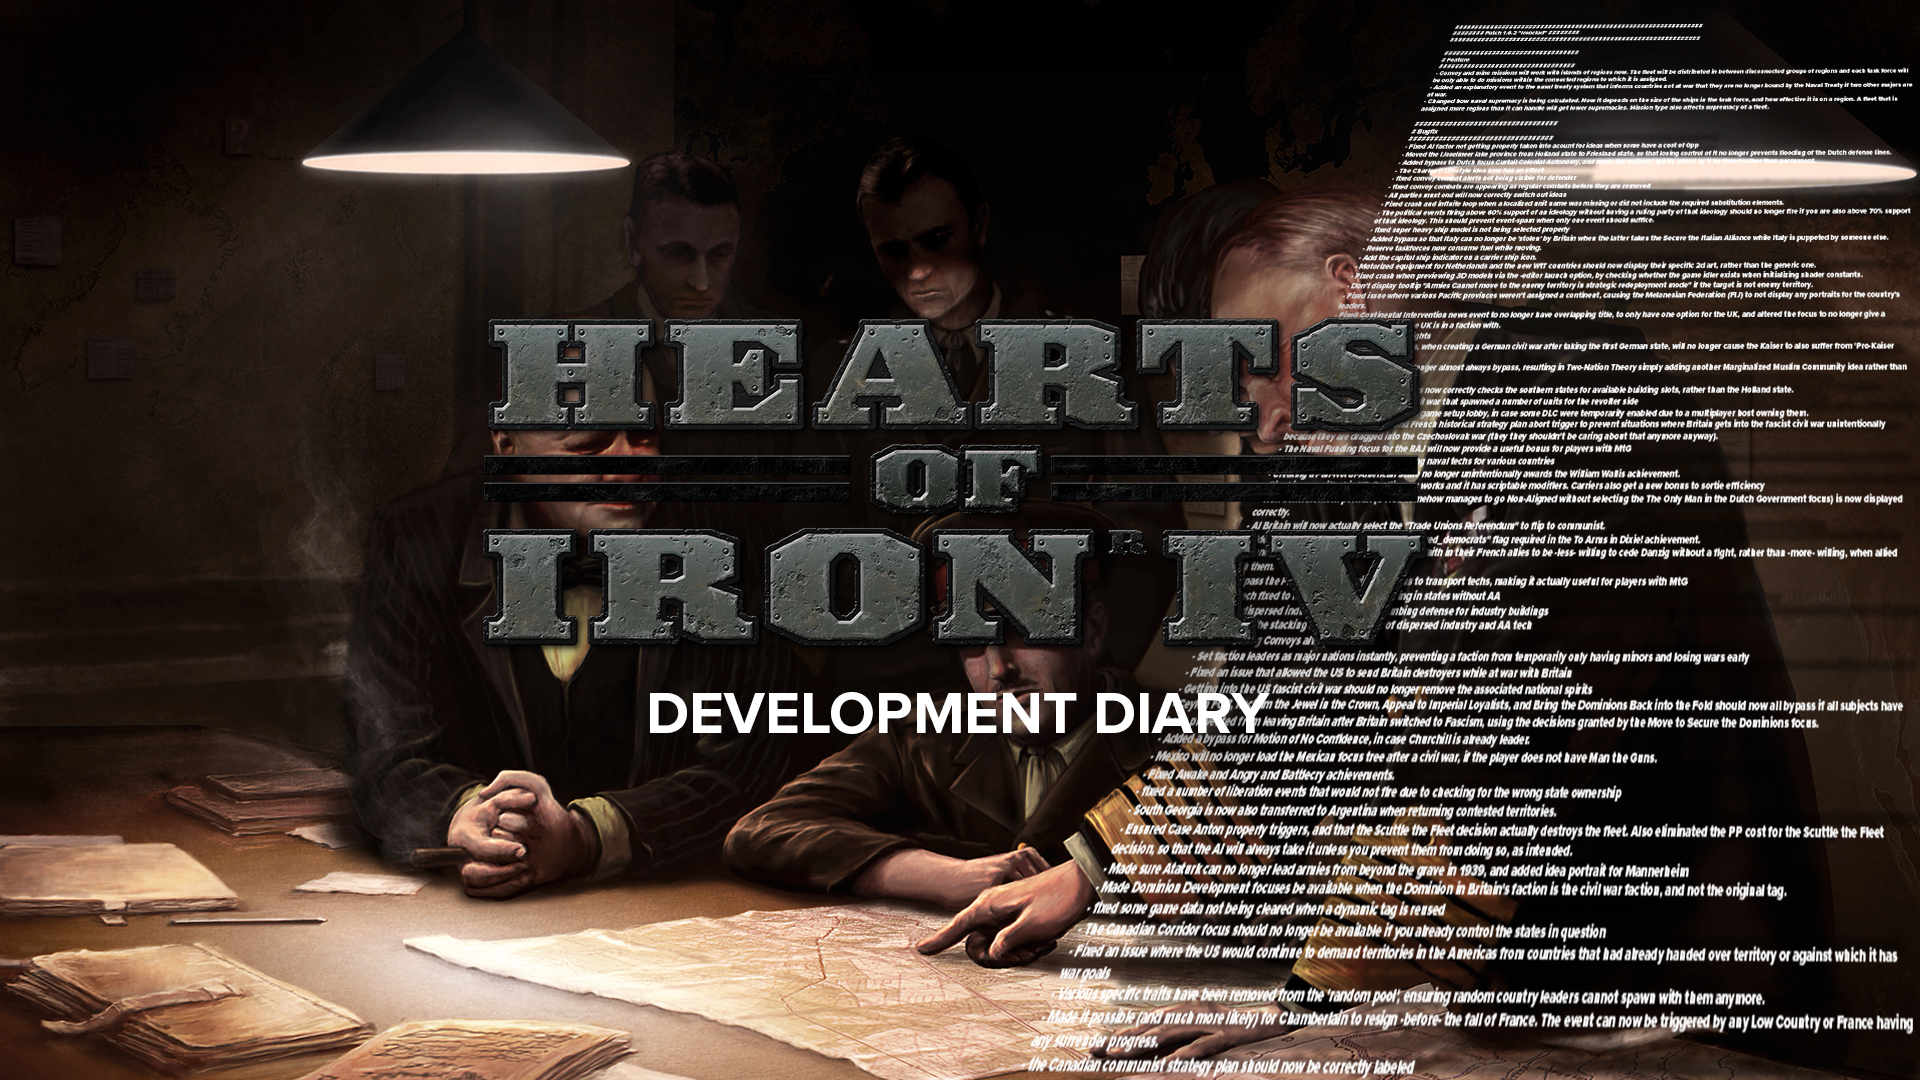 hearts of iron 4 waking the tiger torrent